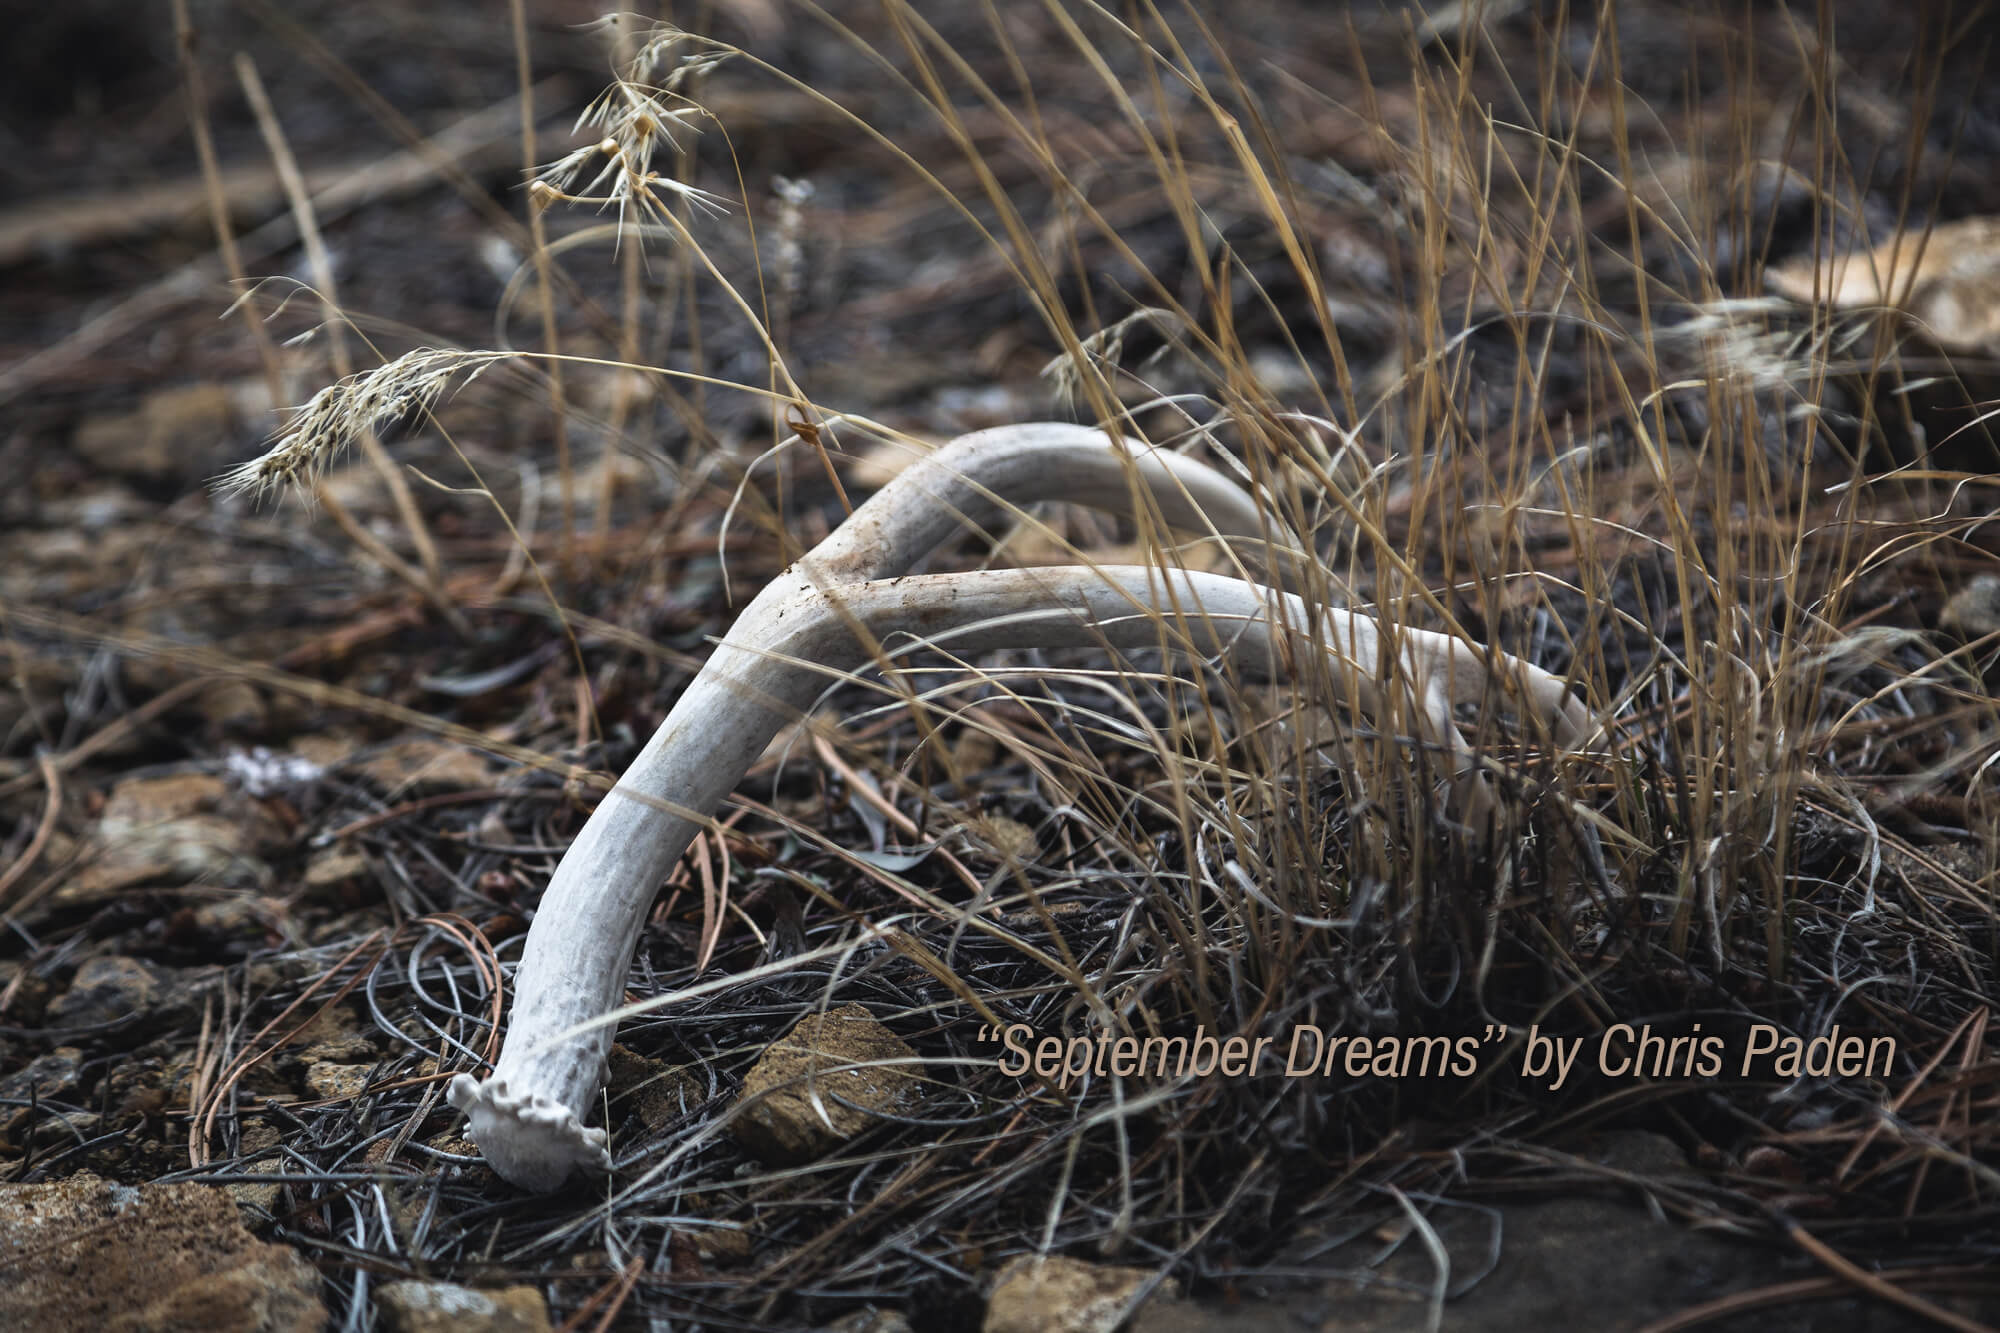 Photograph of shed antlers on the ground with the words "'September Dreams' by Chris Paden."